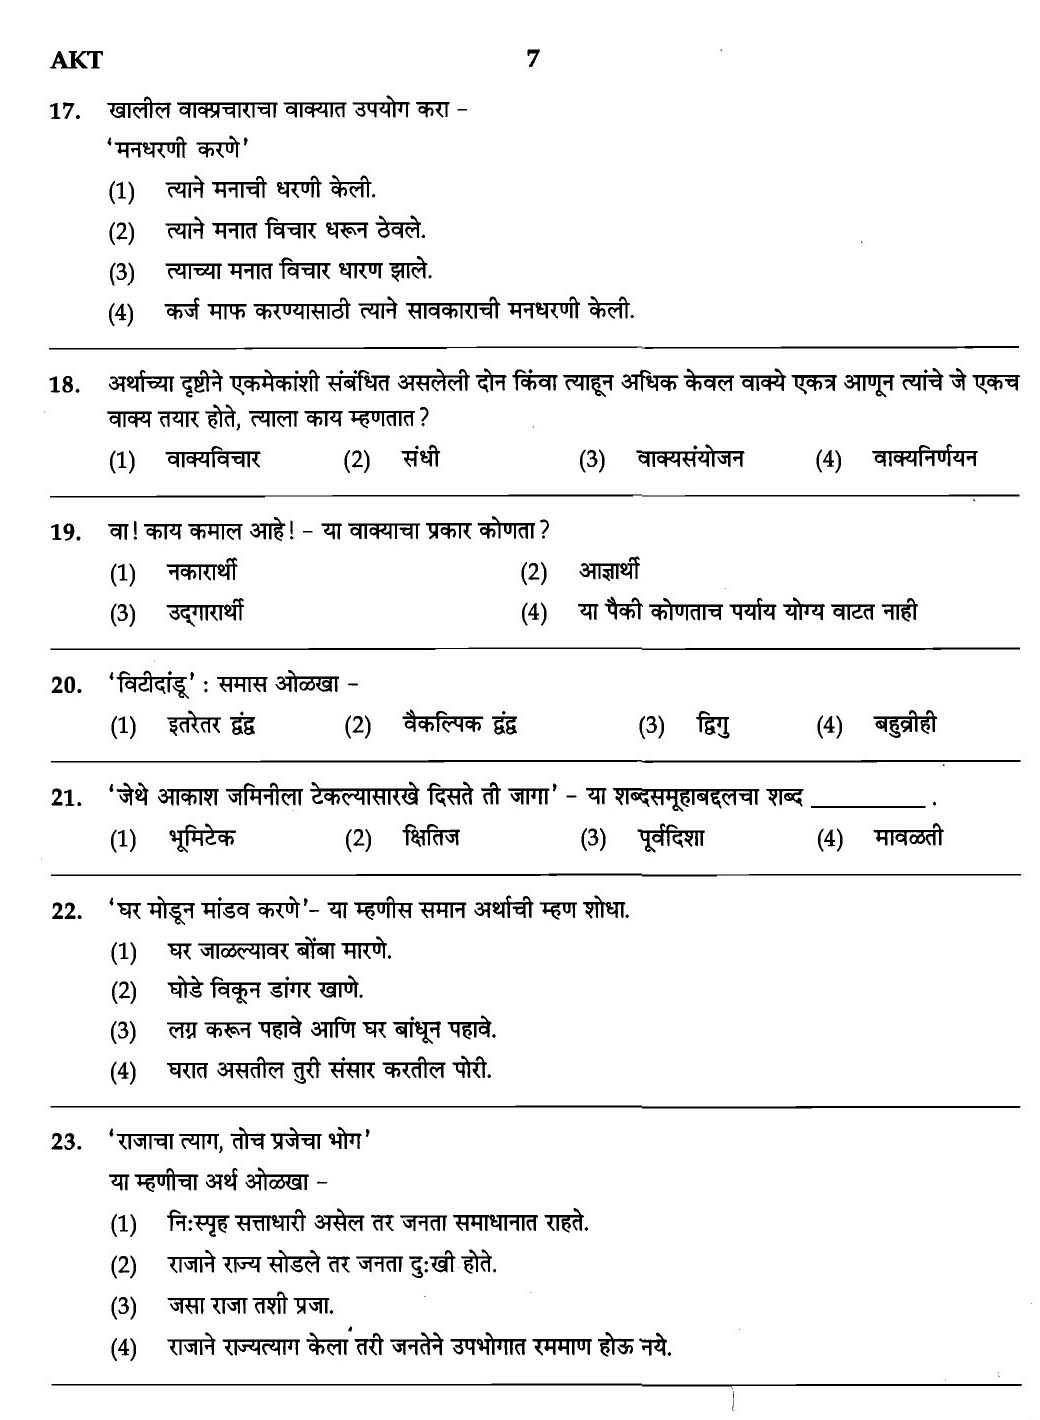 MPSC Agricultural Services Exam 2007 General Question Paper 5